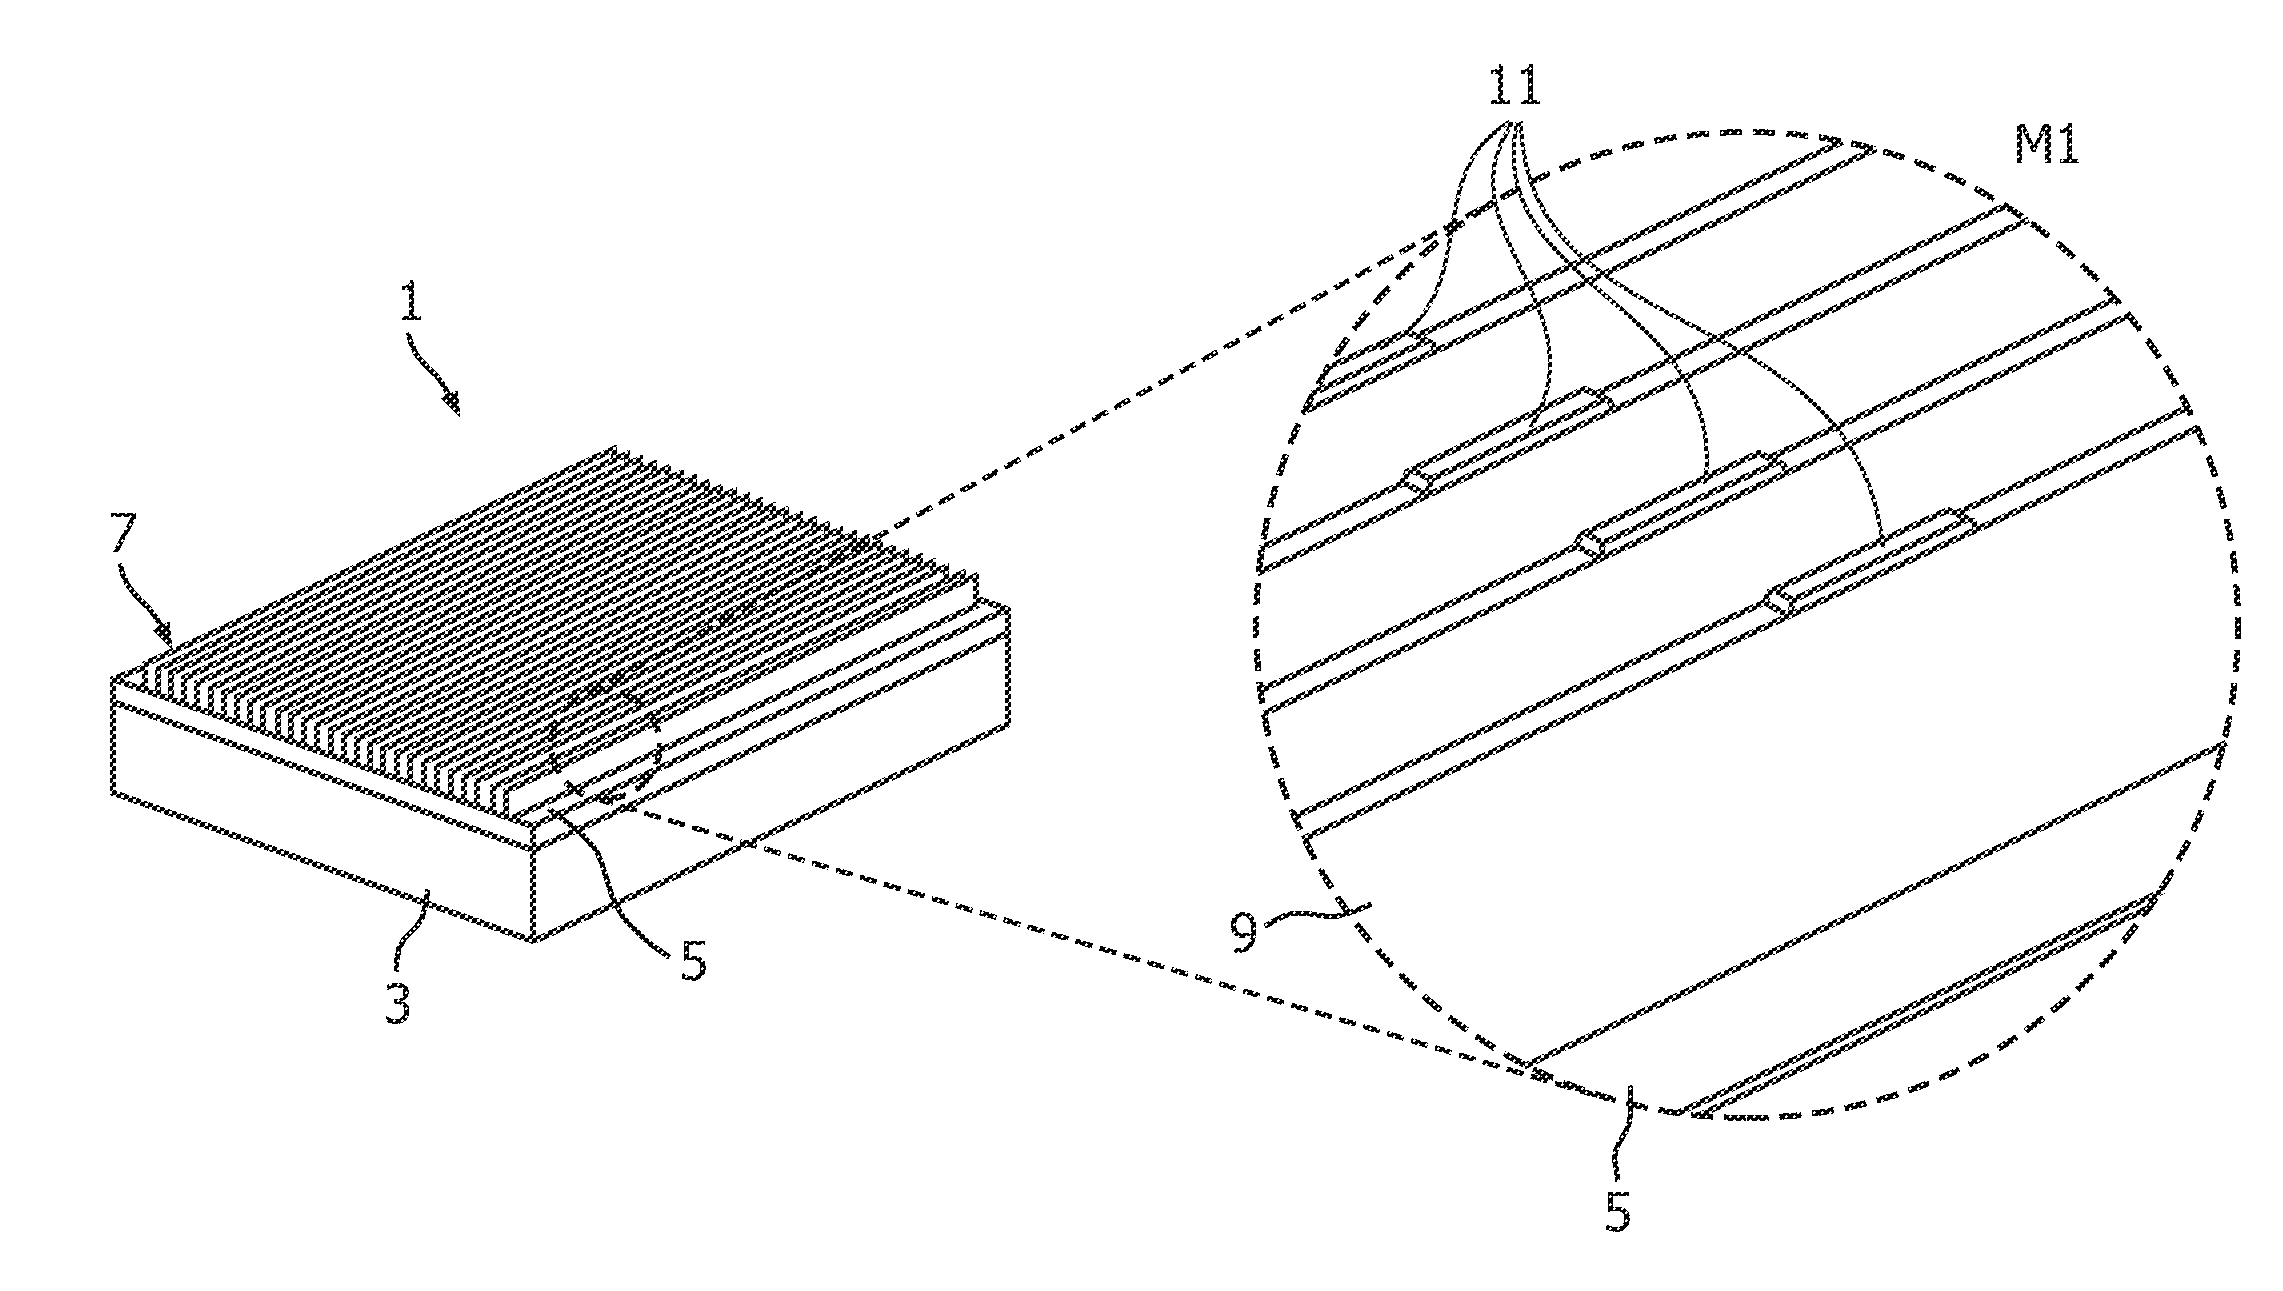 Grid and method of manufacturing a grid for selective transmission of electromagnetic radiation, particularly x-ray radiation for mammography applications